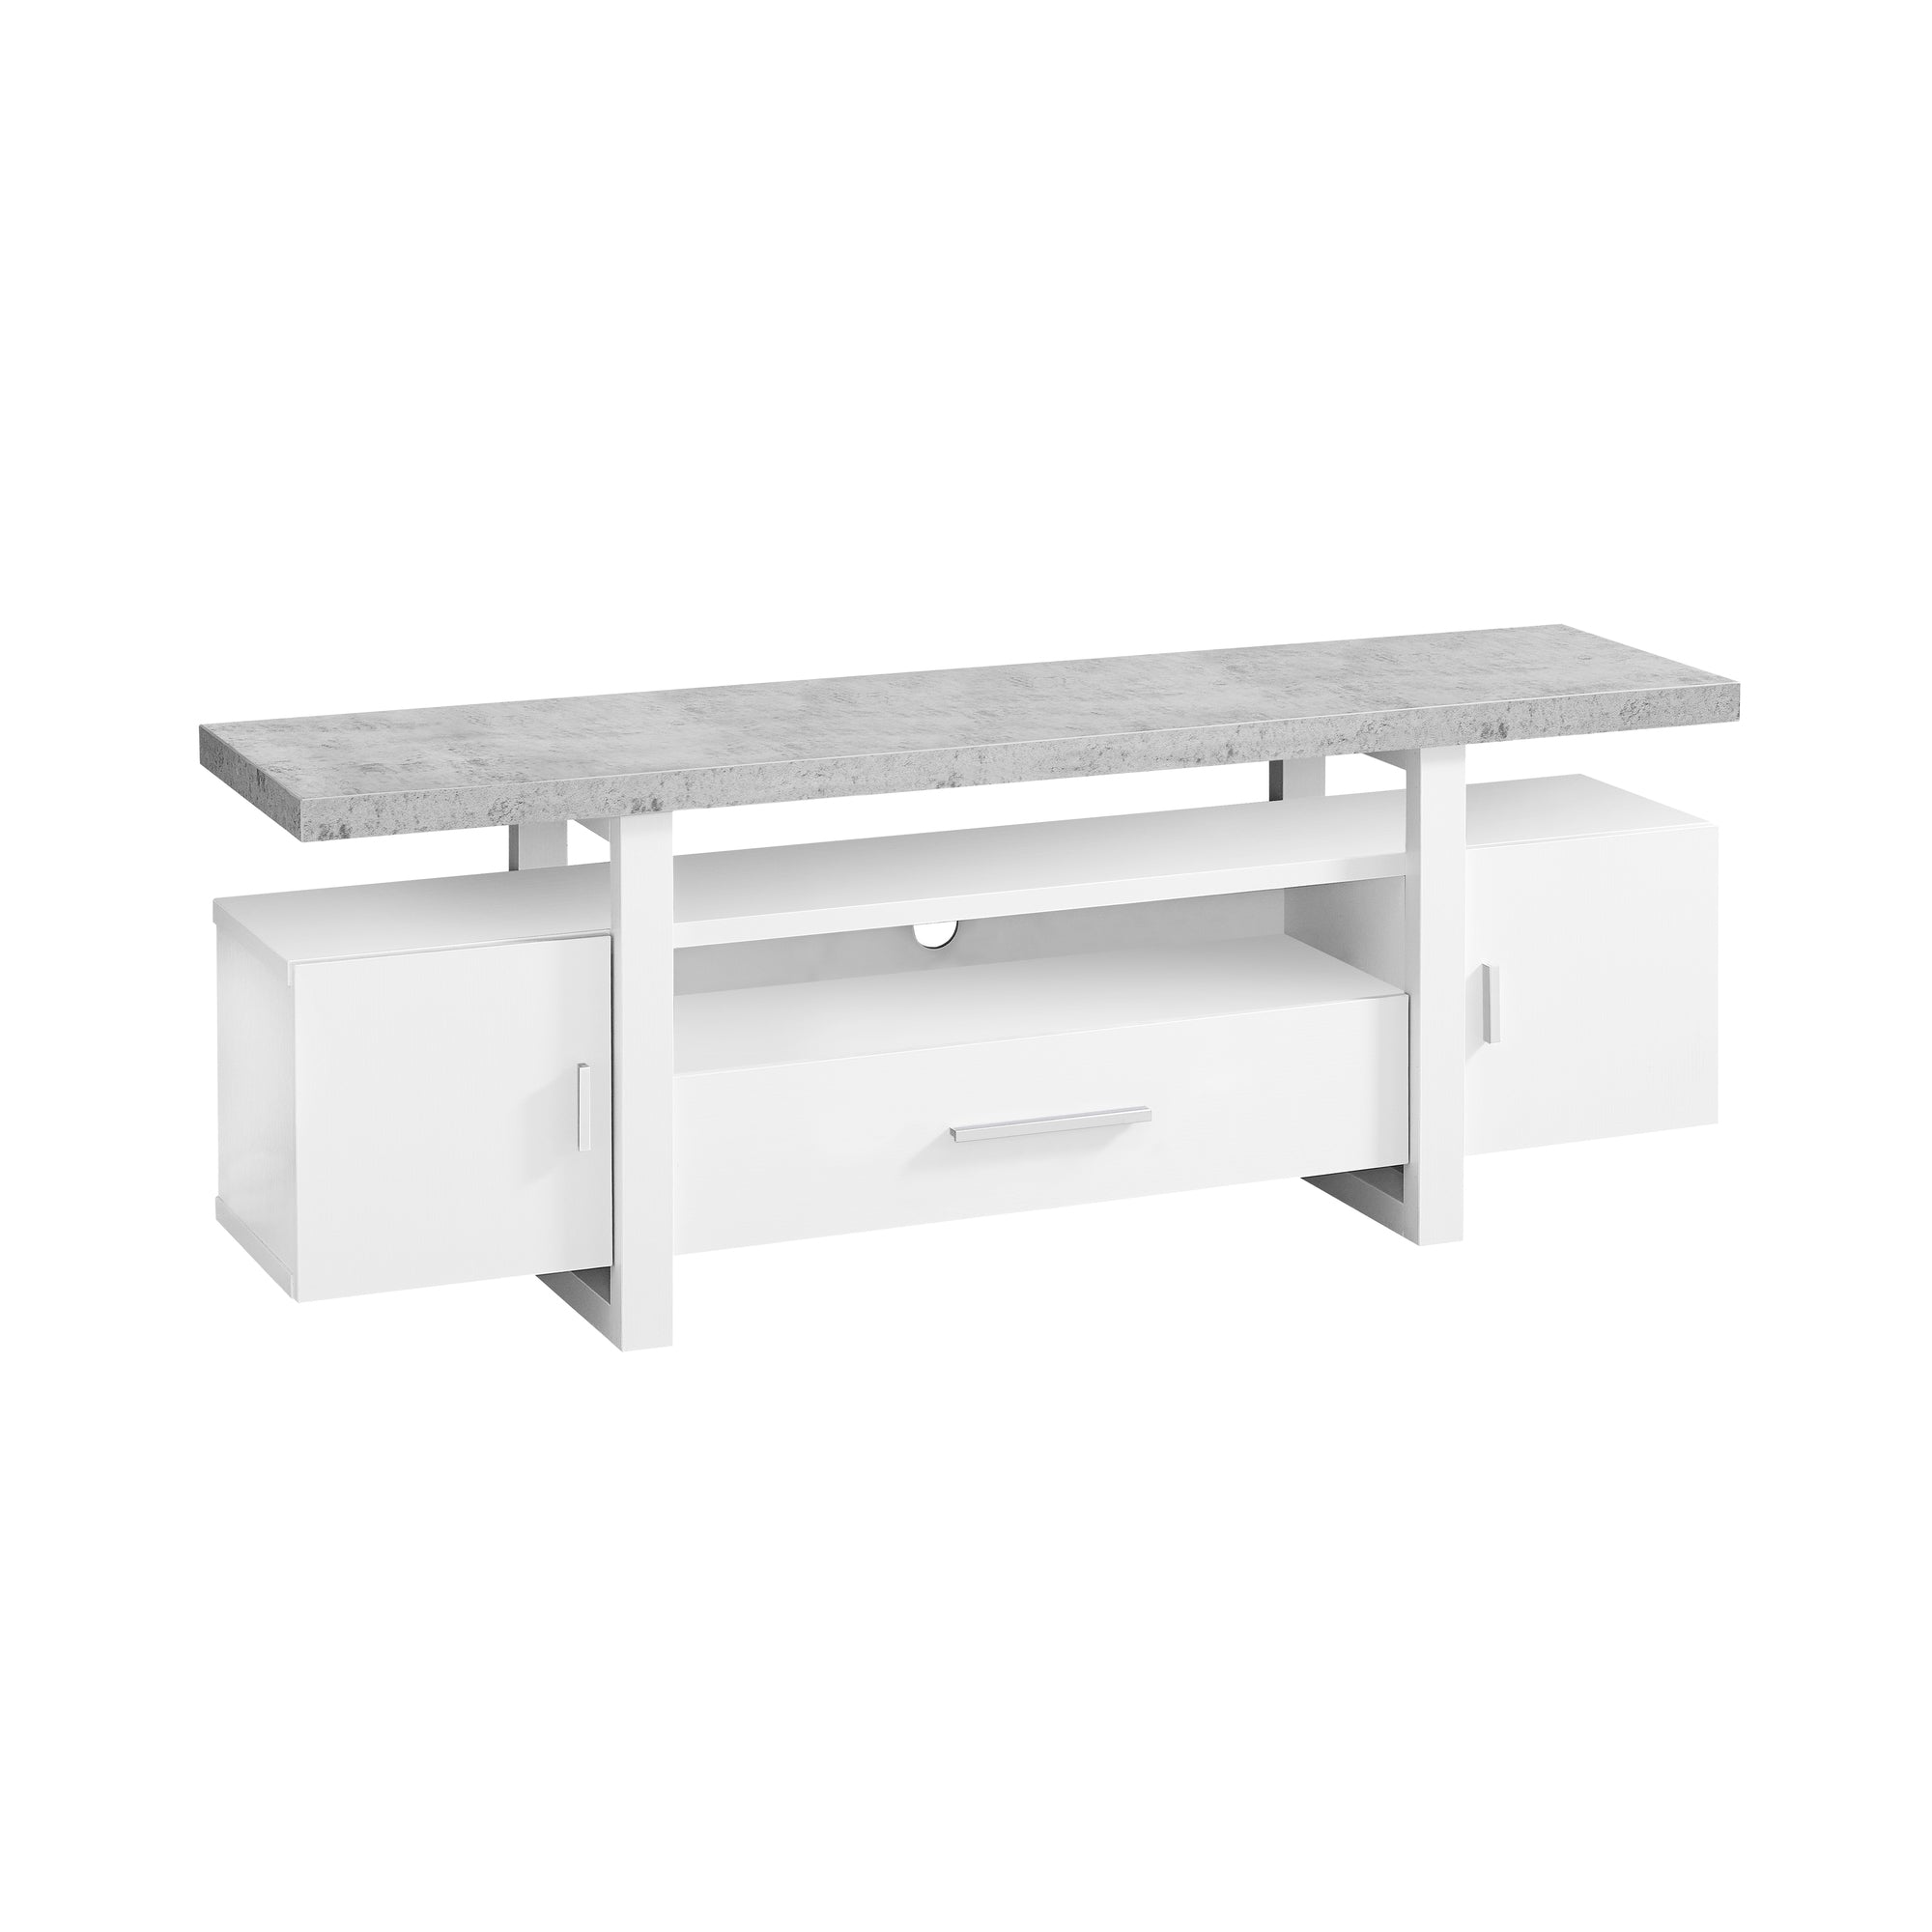 Tv Stand - 60L / White / Cement-Look Top